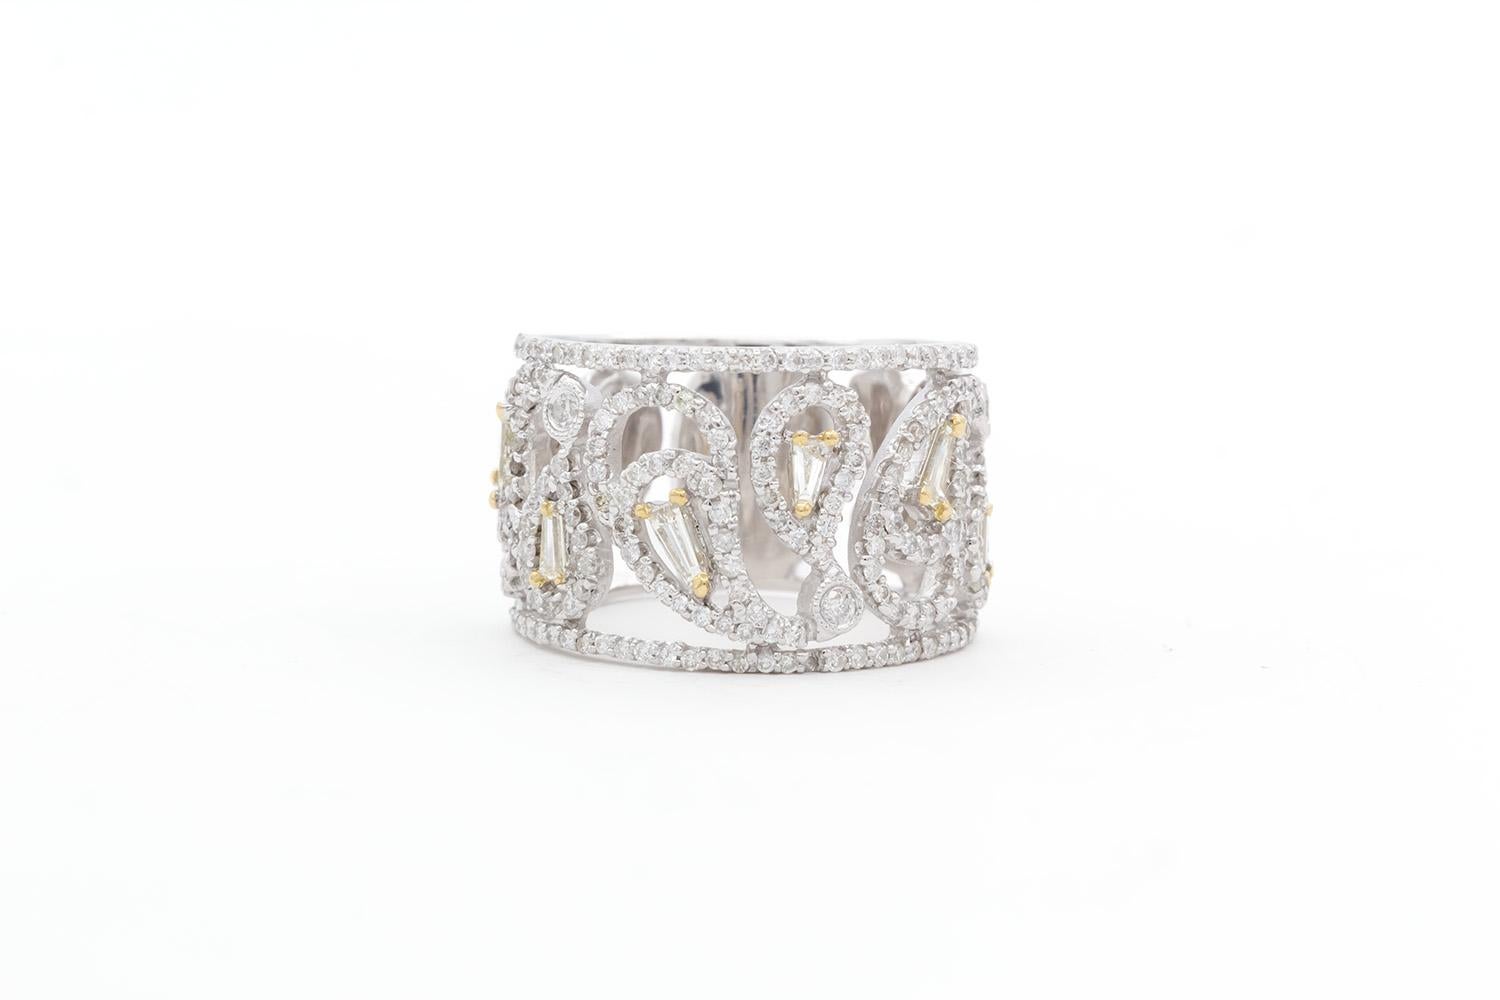 We are pleased to present this 18K White Gold Yellow Gold & Diamond Lattice Cocktail Ring. This beautiful ring feature an estimated 1.50ct tapered baguette and round brilliant cut diamonds set in an 18k White & Yellow Gold lattice style cocktail